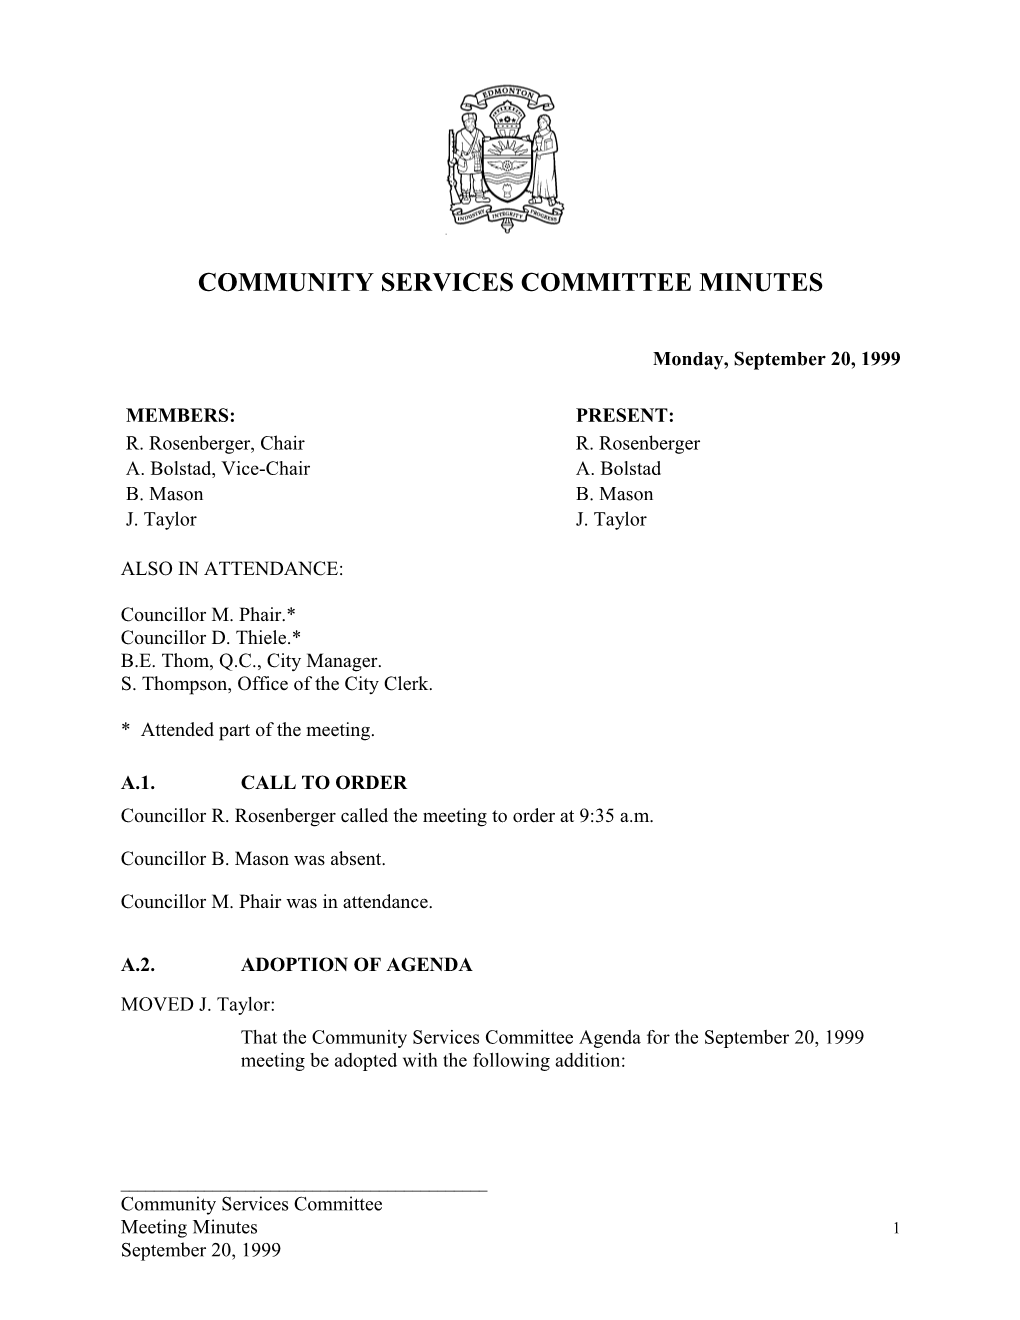 Minutes for Community Services Committee September 20, 1999 Meeting